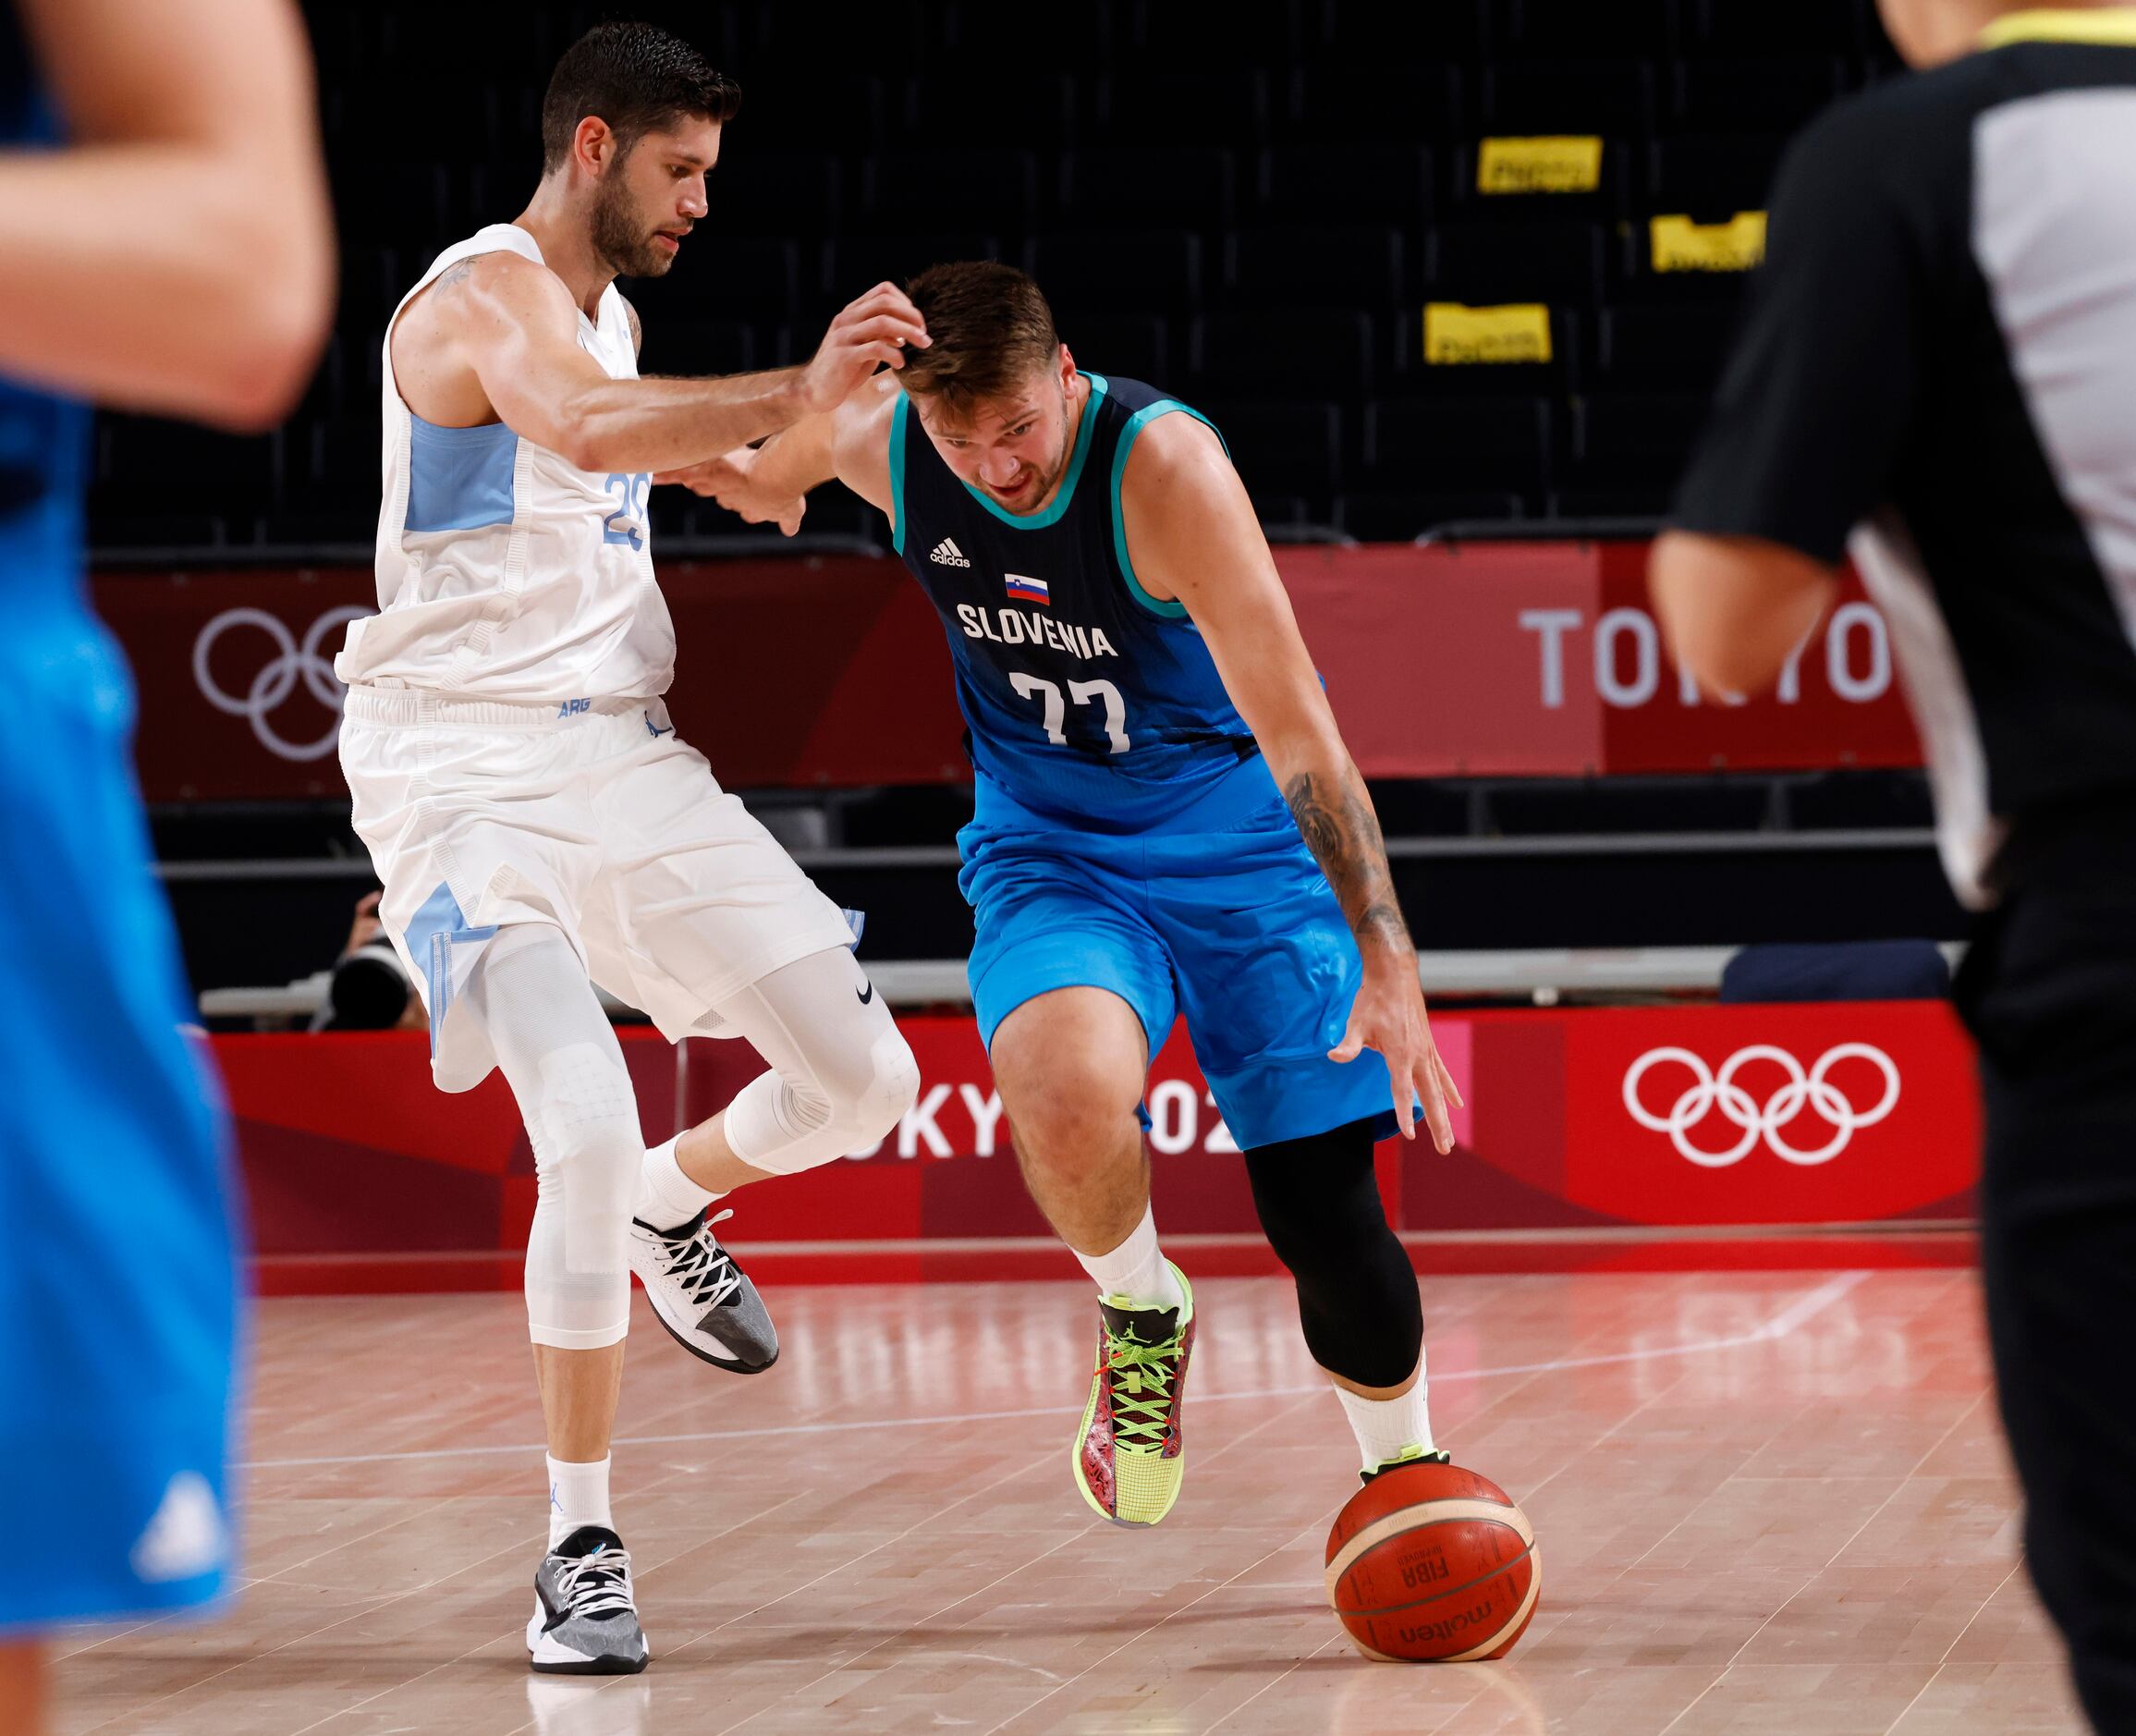 Tokyo Olympics: Luka Doncic's eye-opening 48 points Games debut in